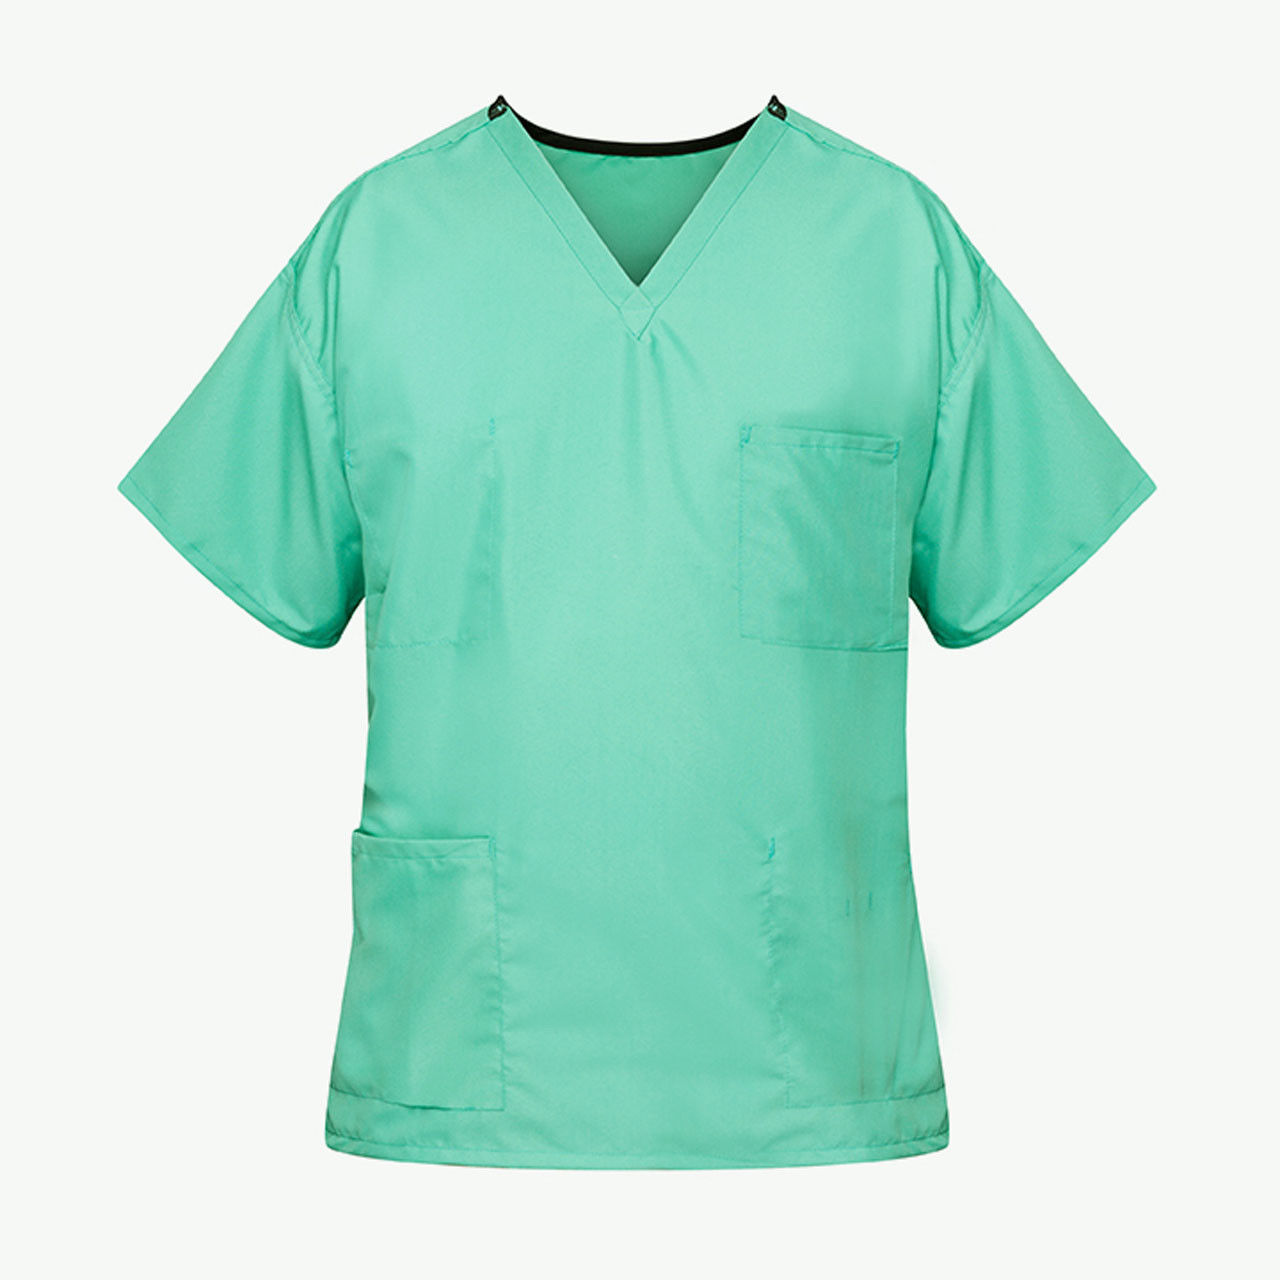 What are the key attributes of the jade green scrubs?